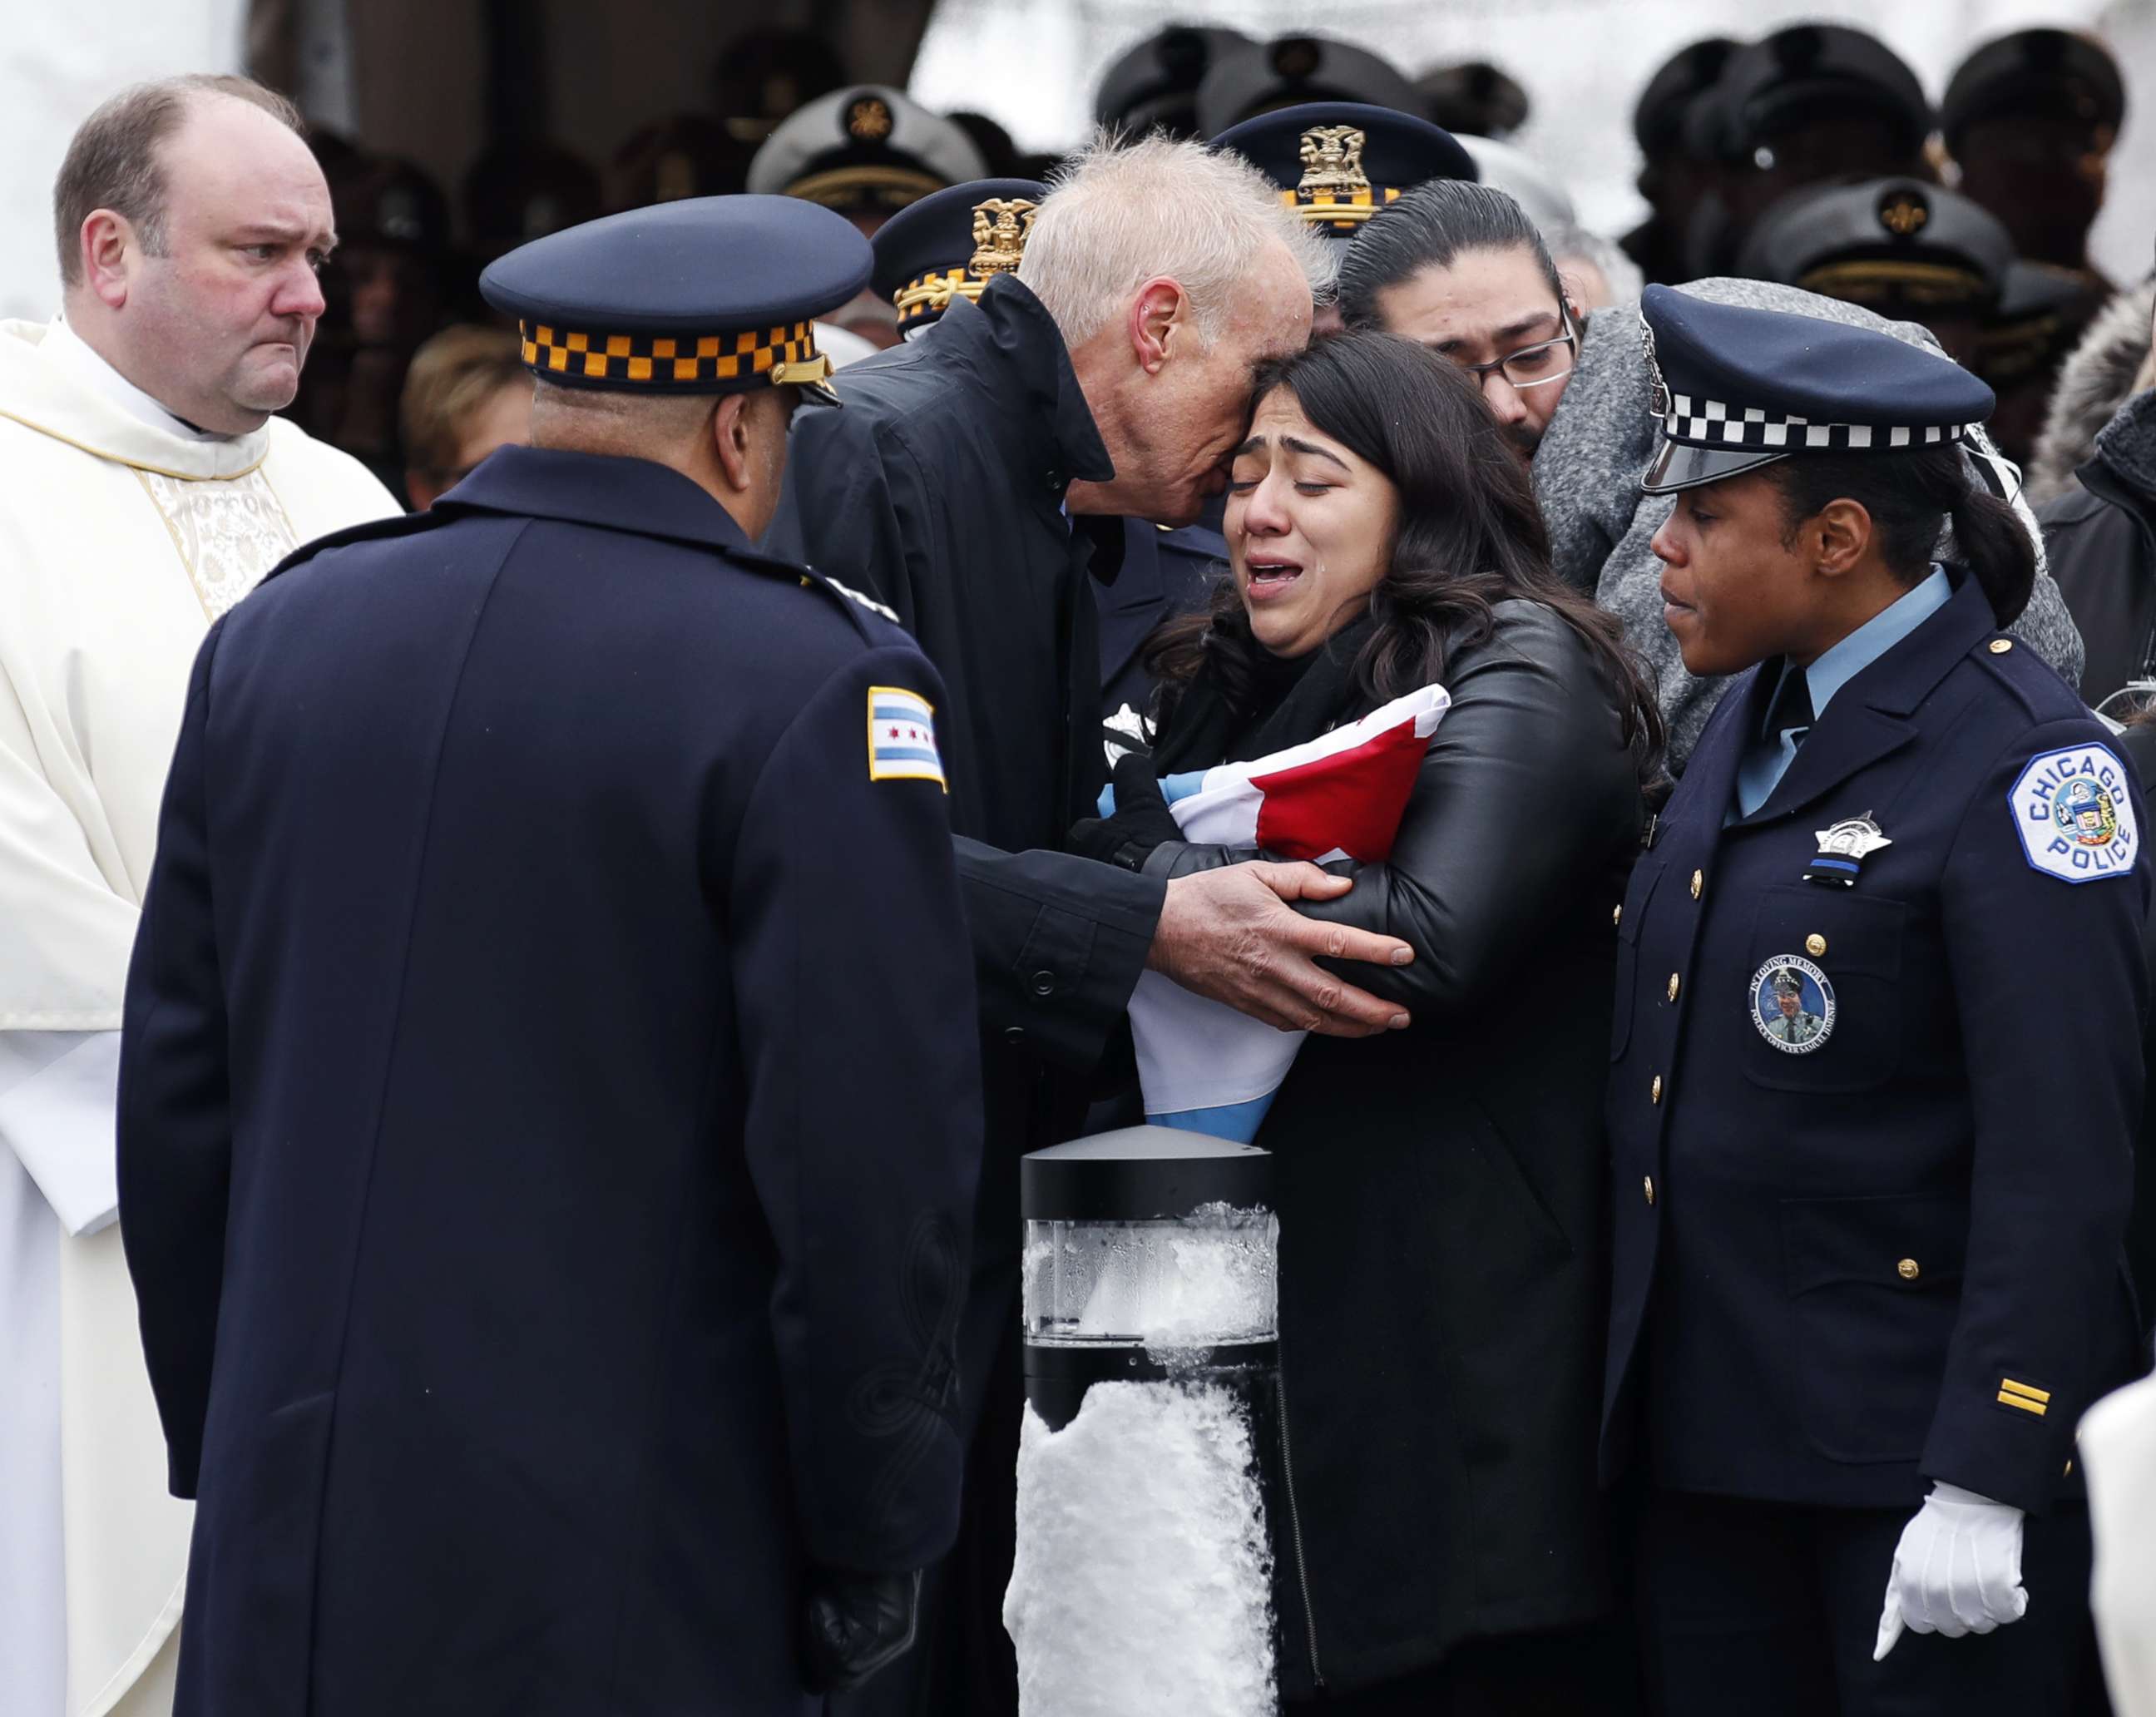 PHOTO: Illinois Governor Bruce Rauner comforts Crystal Garcia, the wife of slain Chicago Police Officer Samuel Jimenez, during funeral services at the Chapel of St Joseph at Shrine of Our Lady of Guadalupe on Nov. 26, 2018 in Des Plaines, Ill.